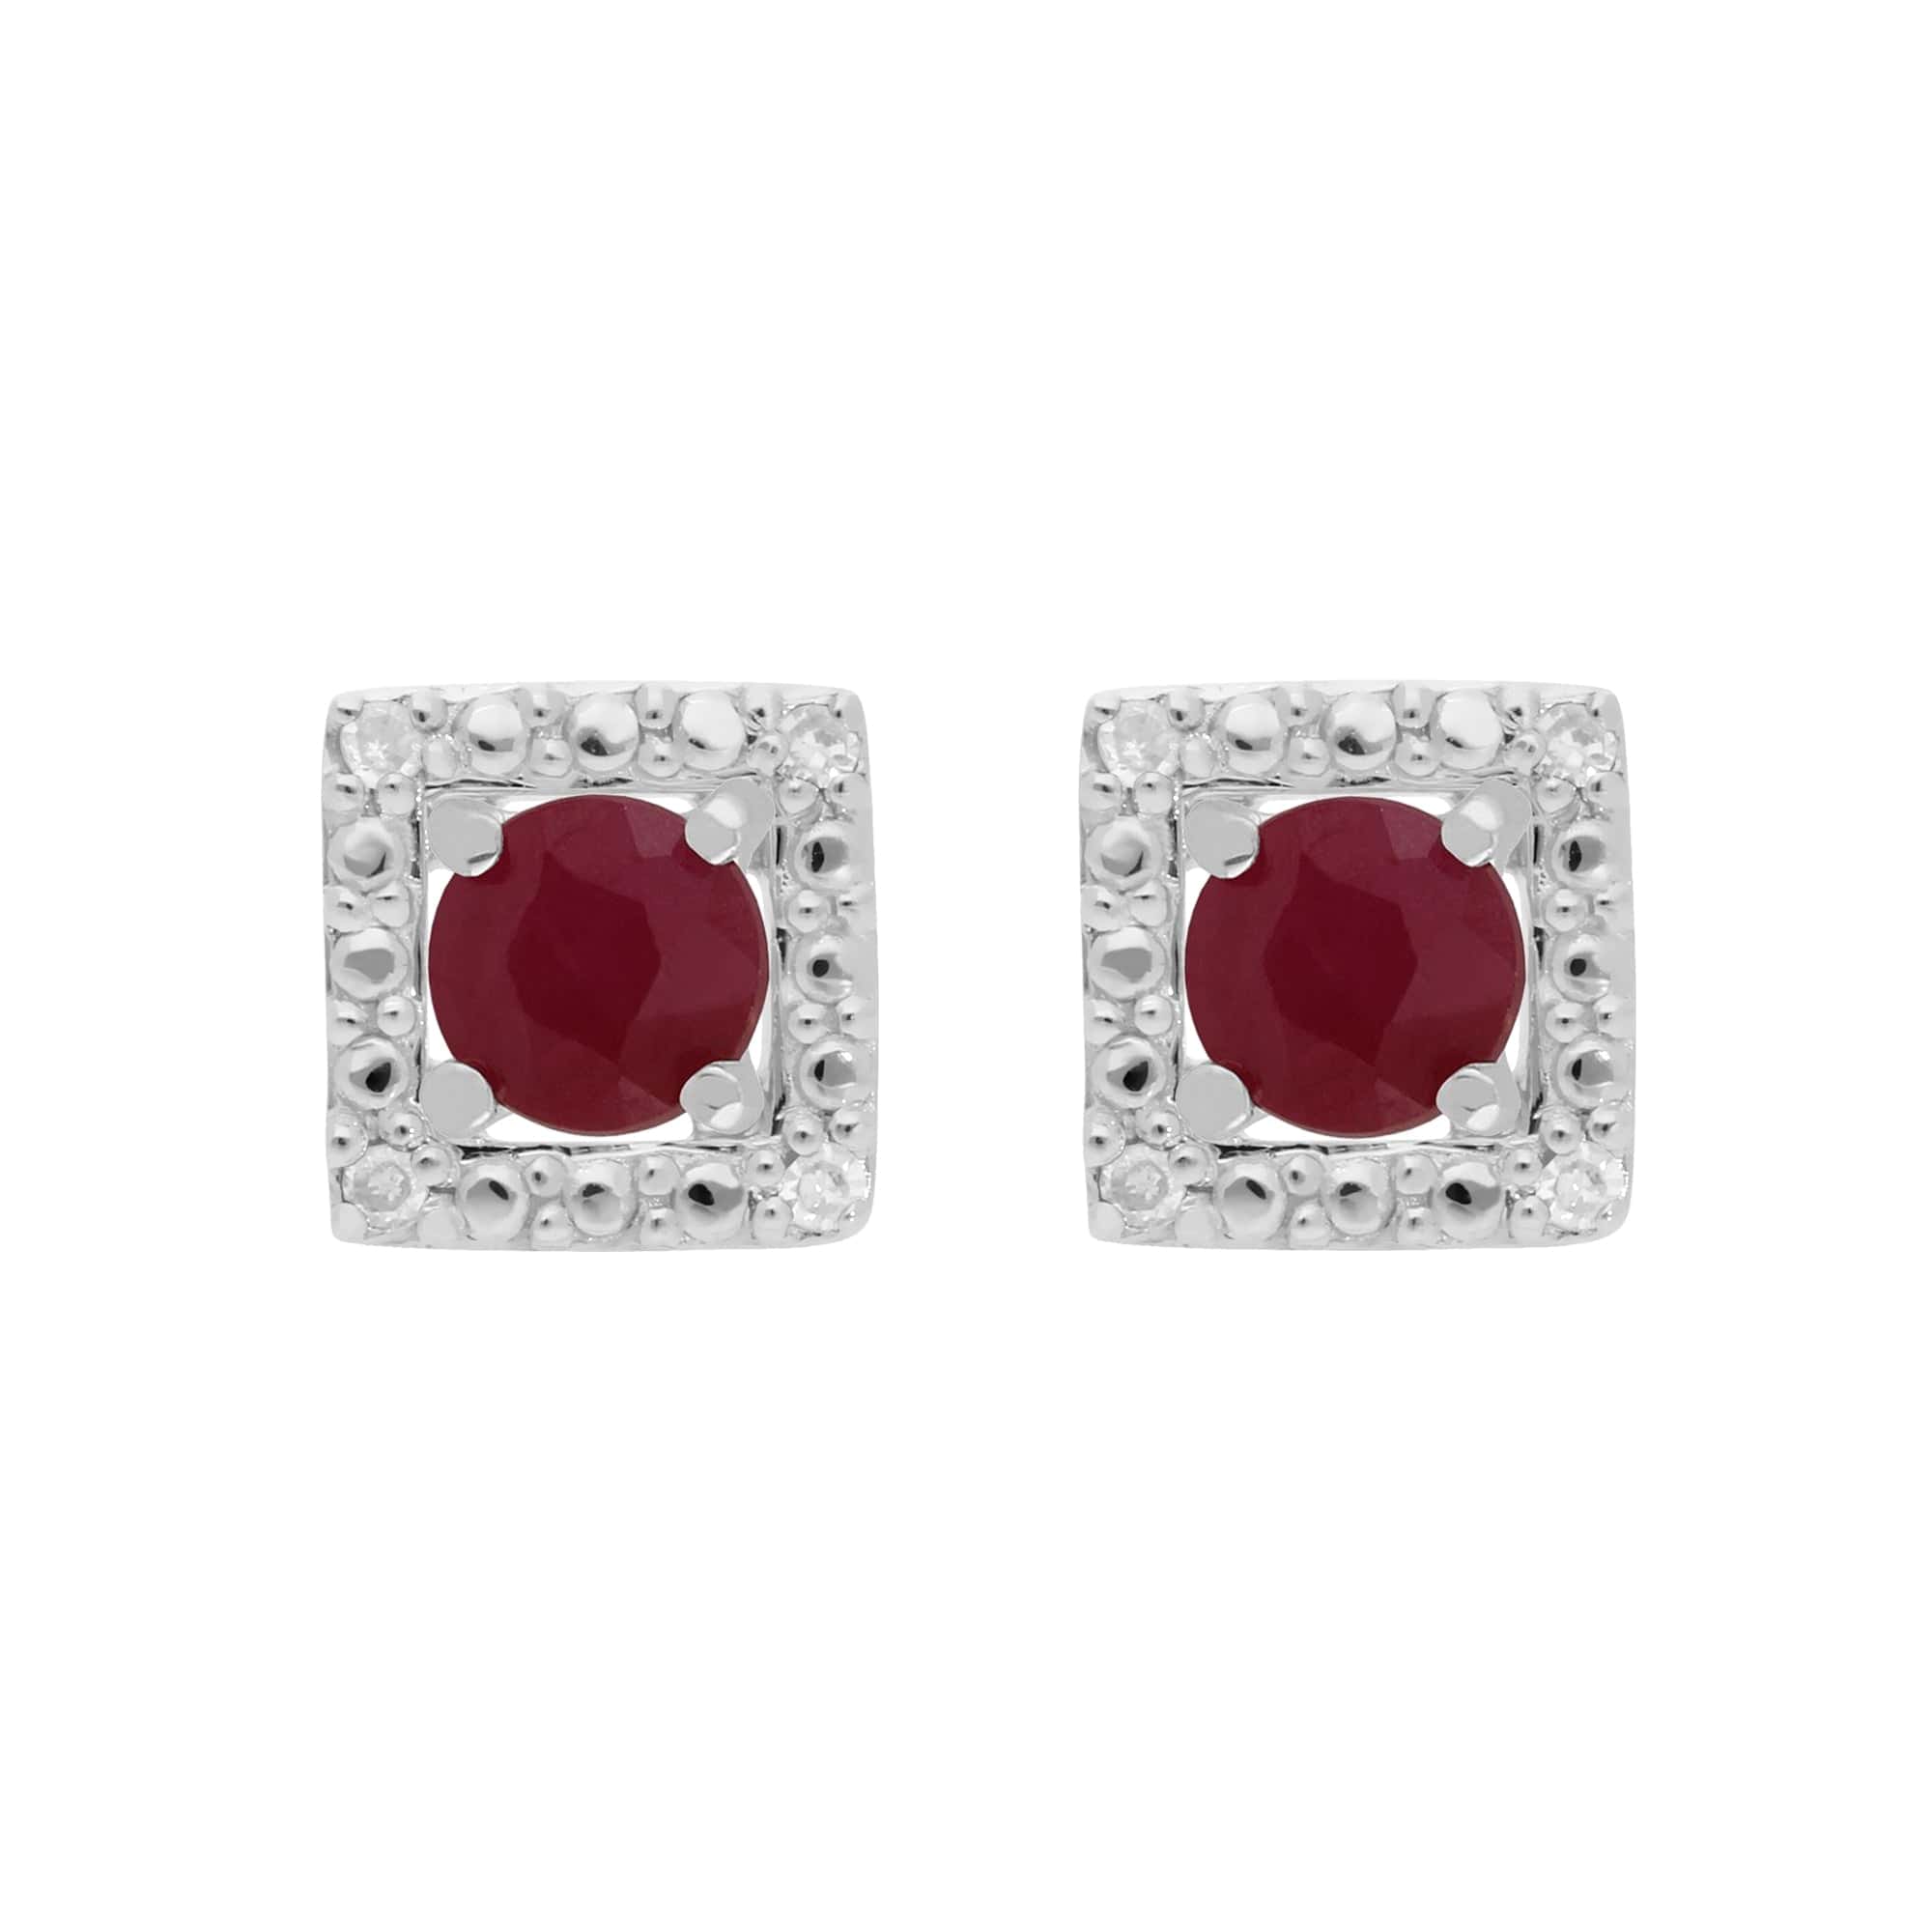 11622-162E0245019 Classic Round Ruby Stud Earrings with Detachable Diamond Square Ear Jacket in 9ct White Gold 1